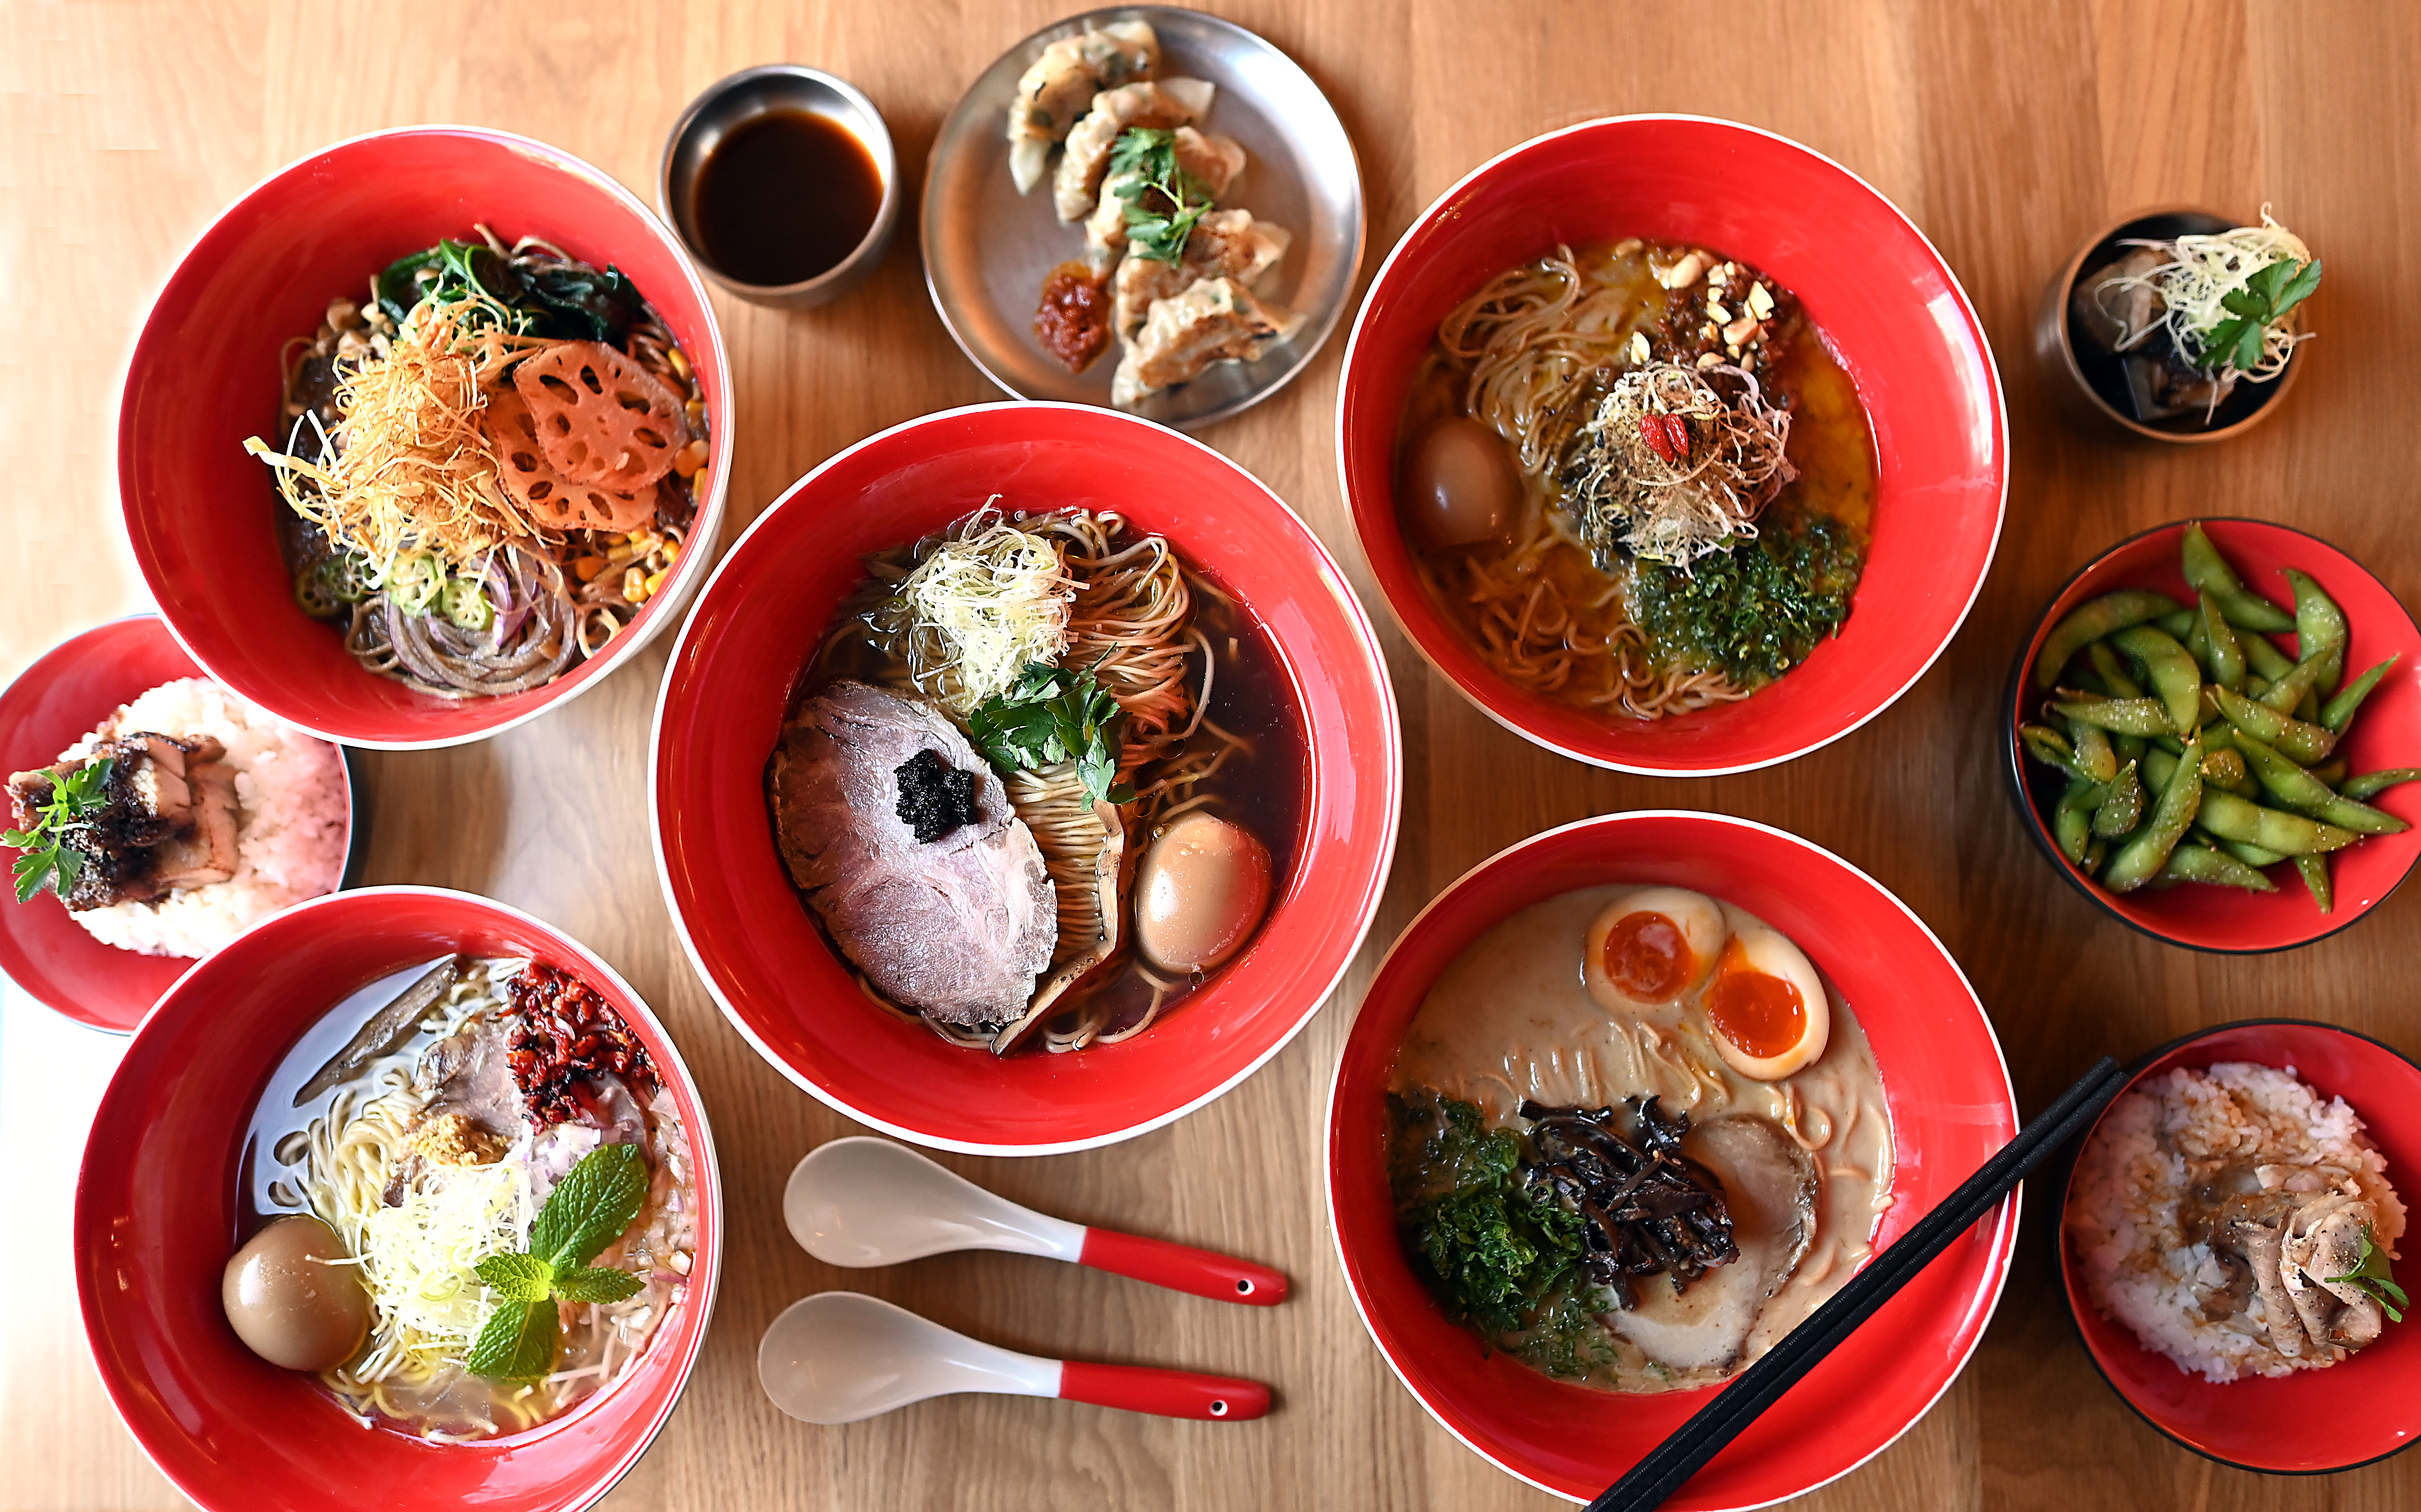 Five bowls of ramen and sides on a table.